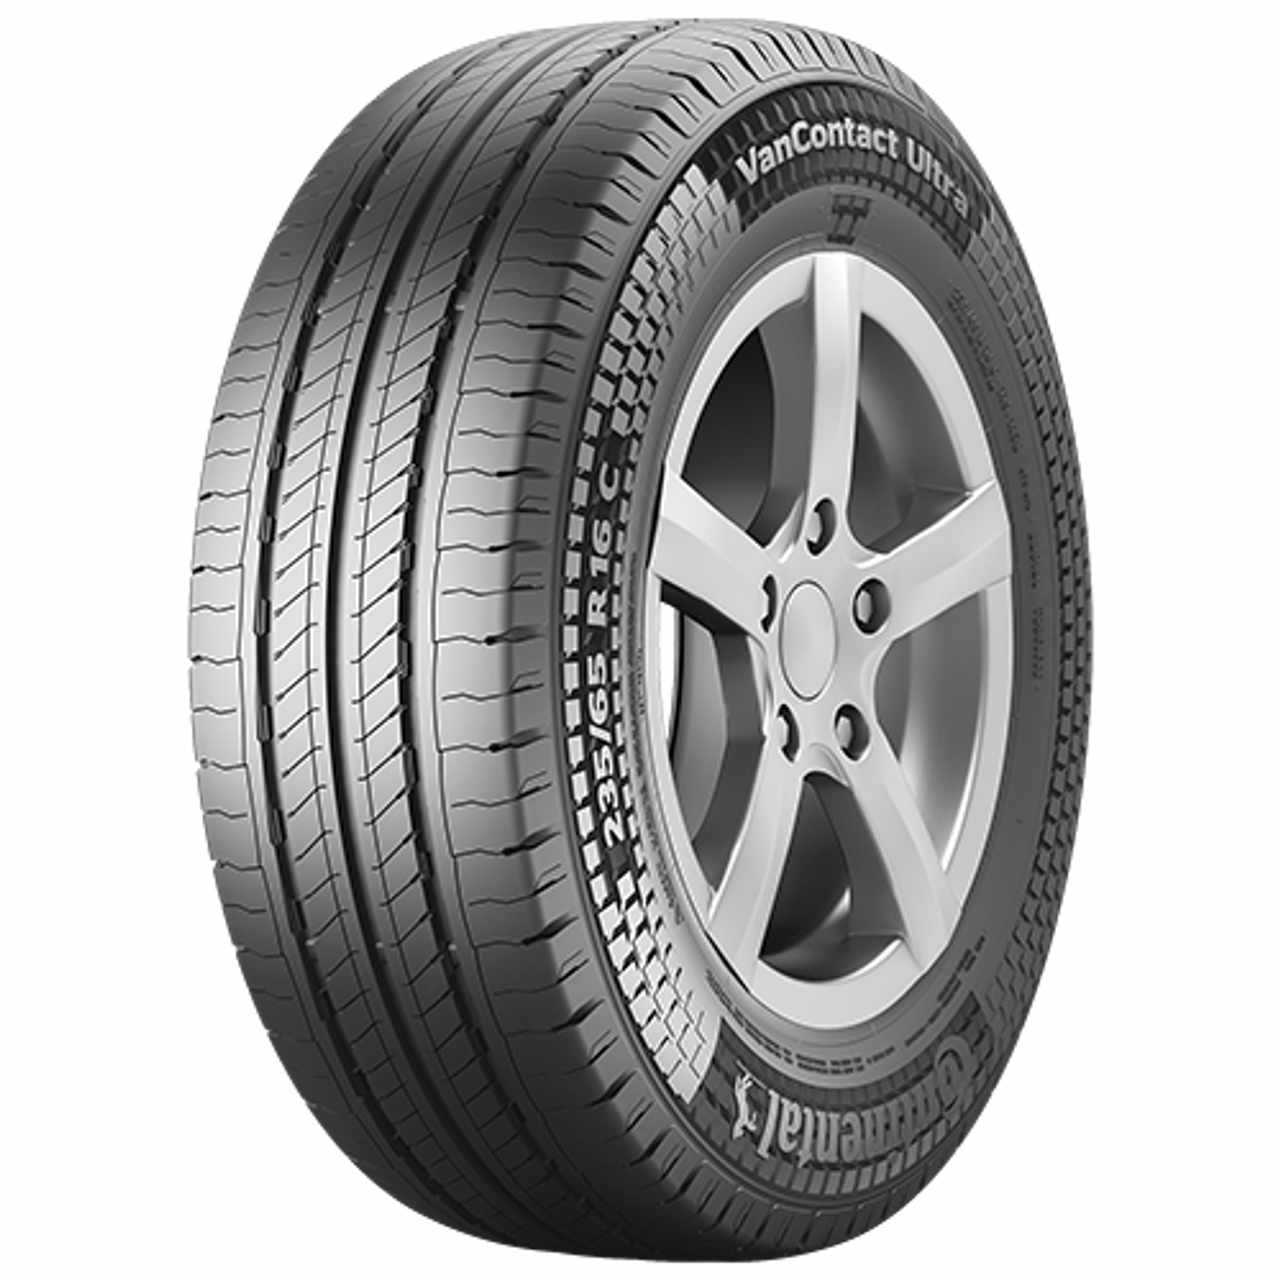 CONTINENTAL VANCONTACT ULTRA 235/60R17C 117R BSW